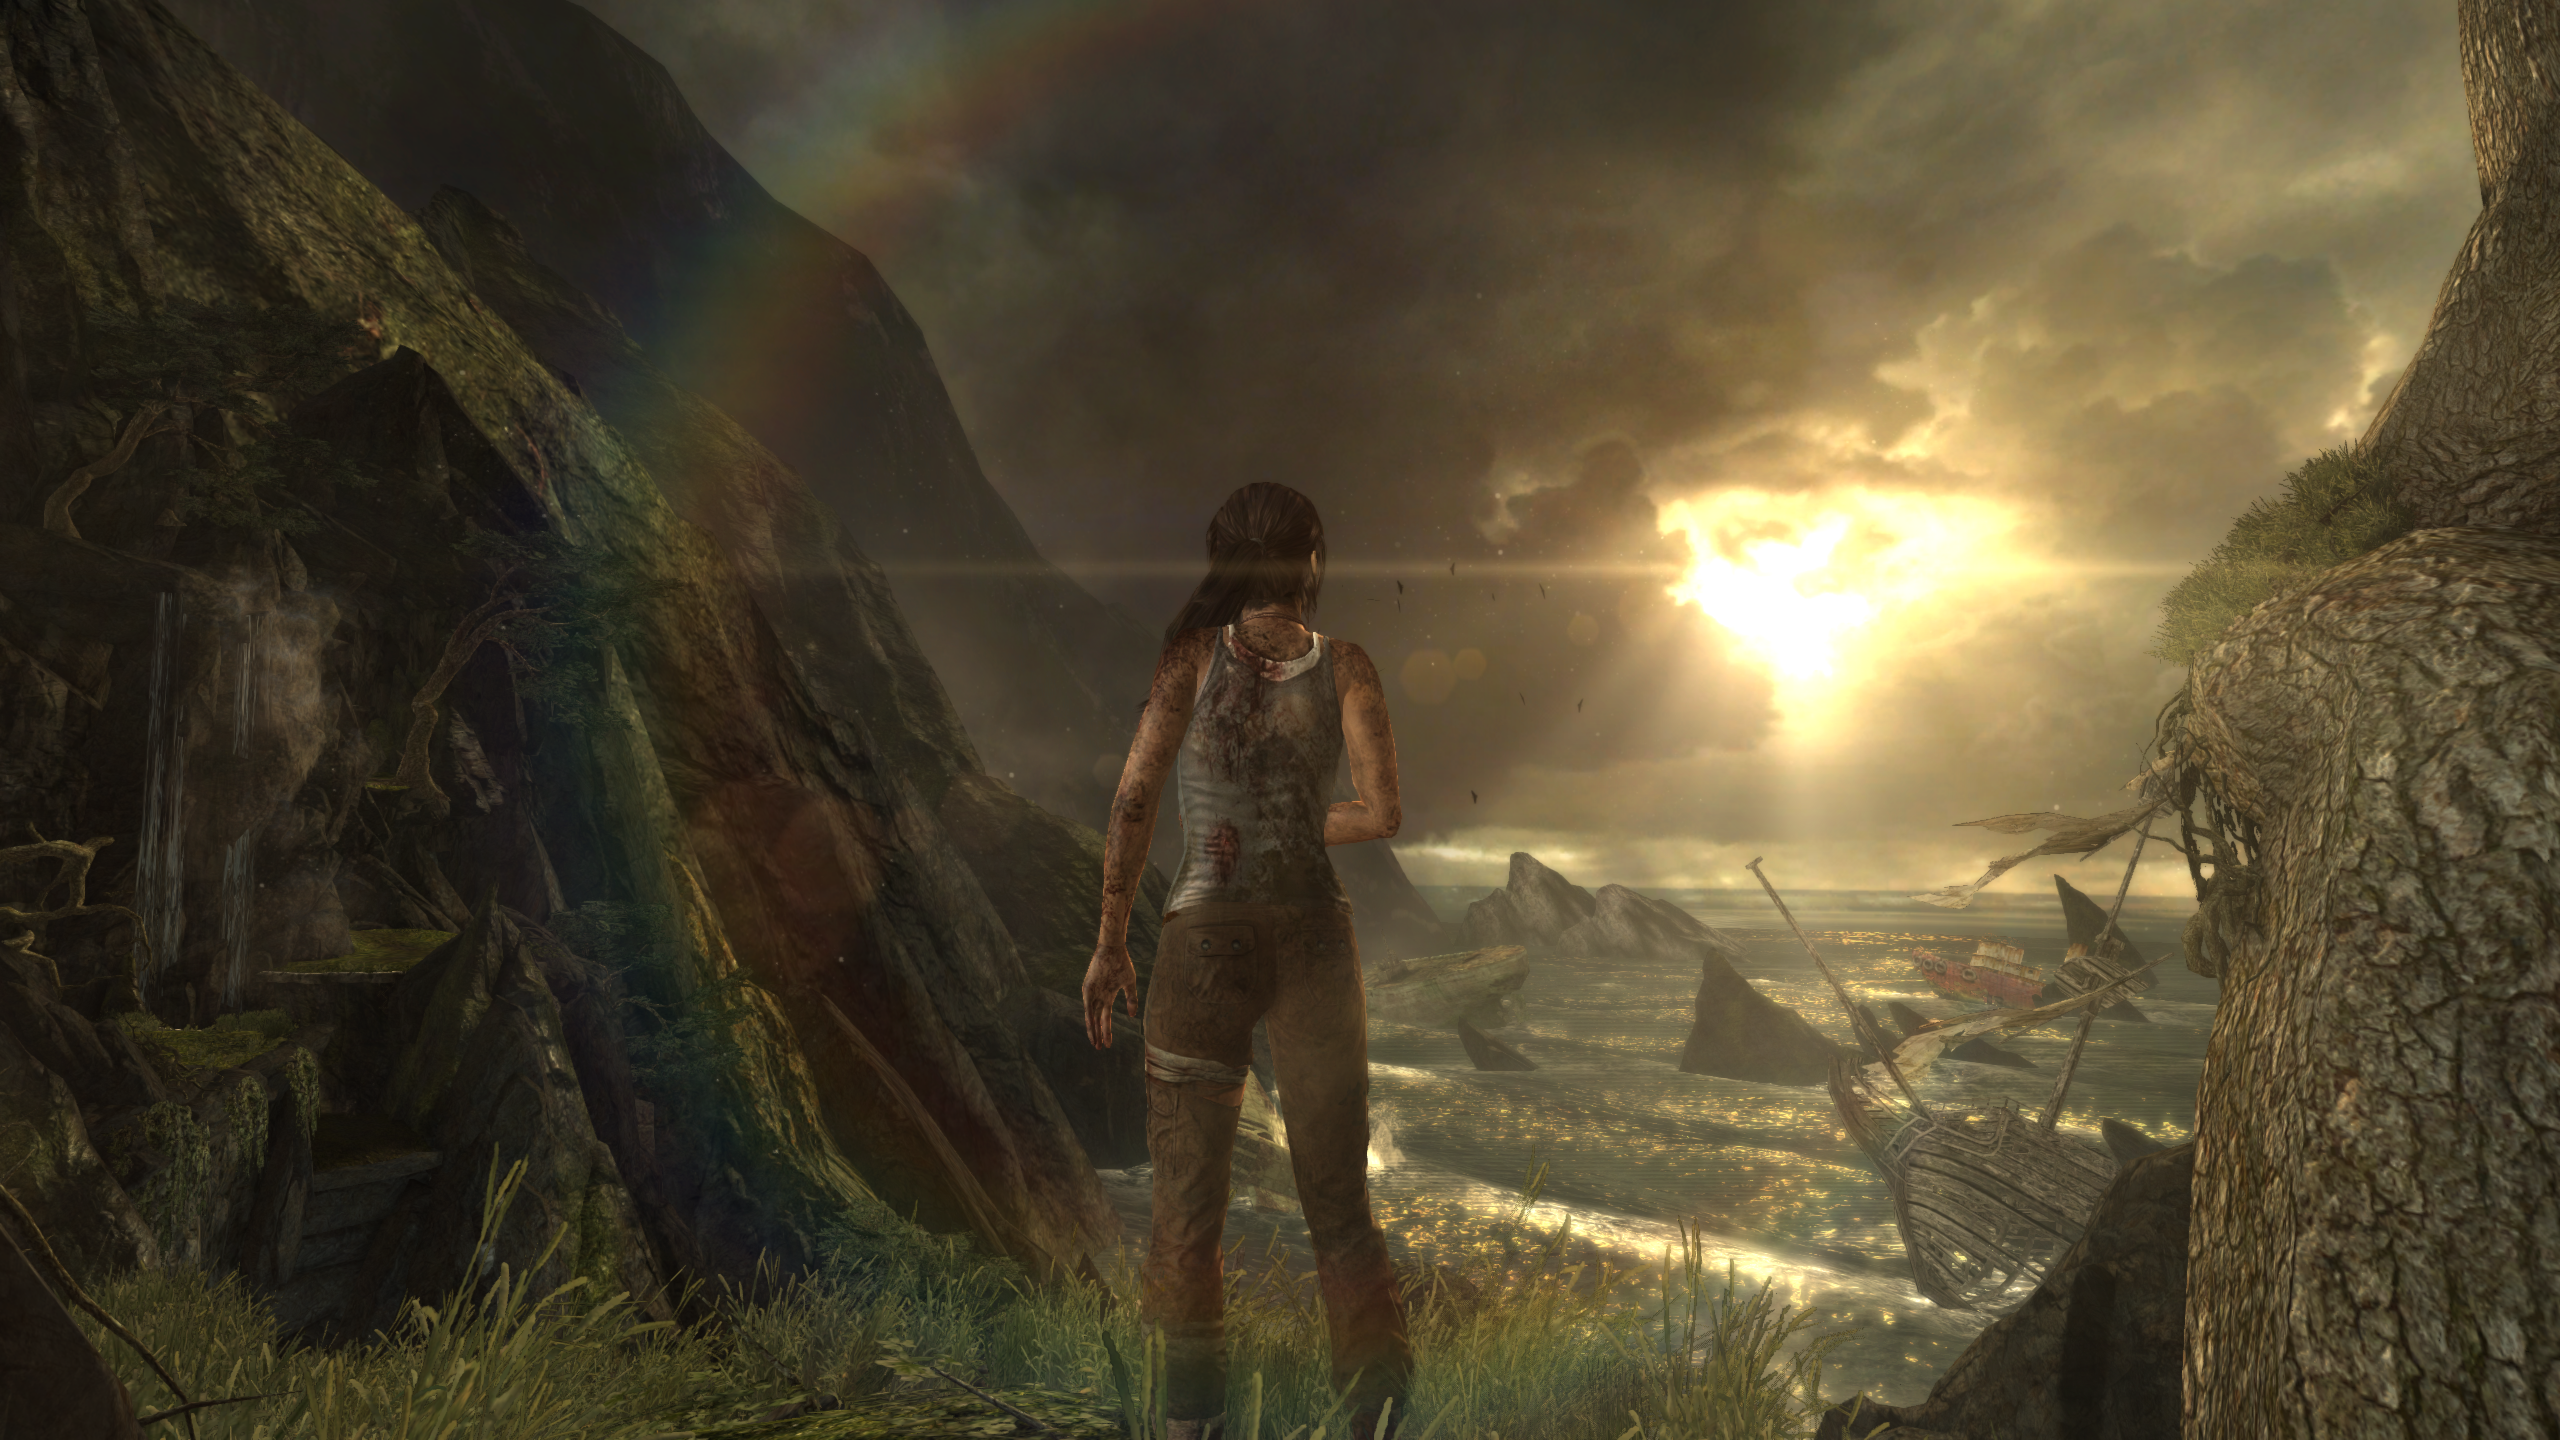 General 2560x1440 Lara Croft (Tomb Raider) Tomb Raider: 15-Year Celebration Tomb Raider (2013) Starting video game art screen shot clouds video game girls video game characters CGI PC gaming sunlight sky standing dirty water Tomb Raider (2013) boat rainbows Sun looking into the distance video games